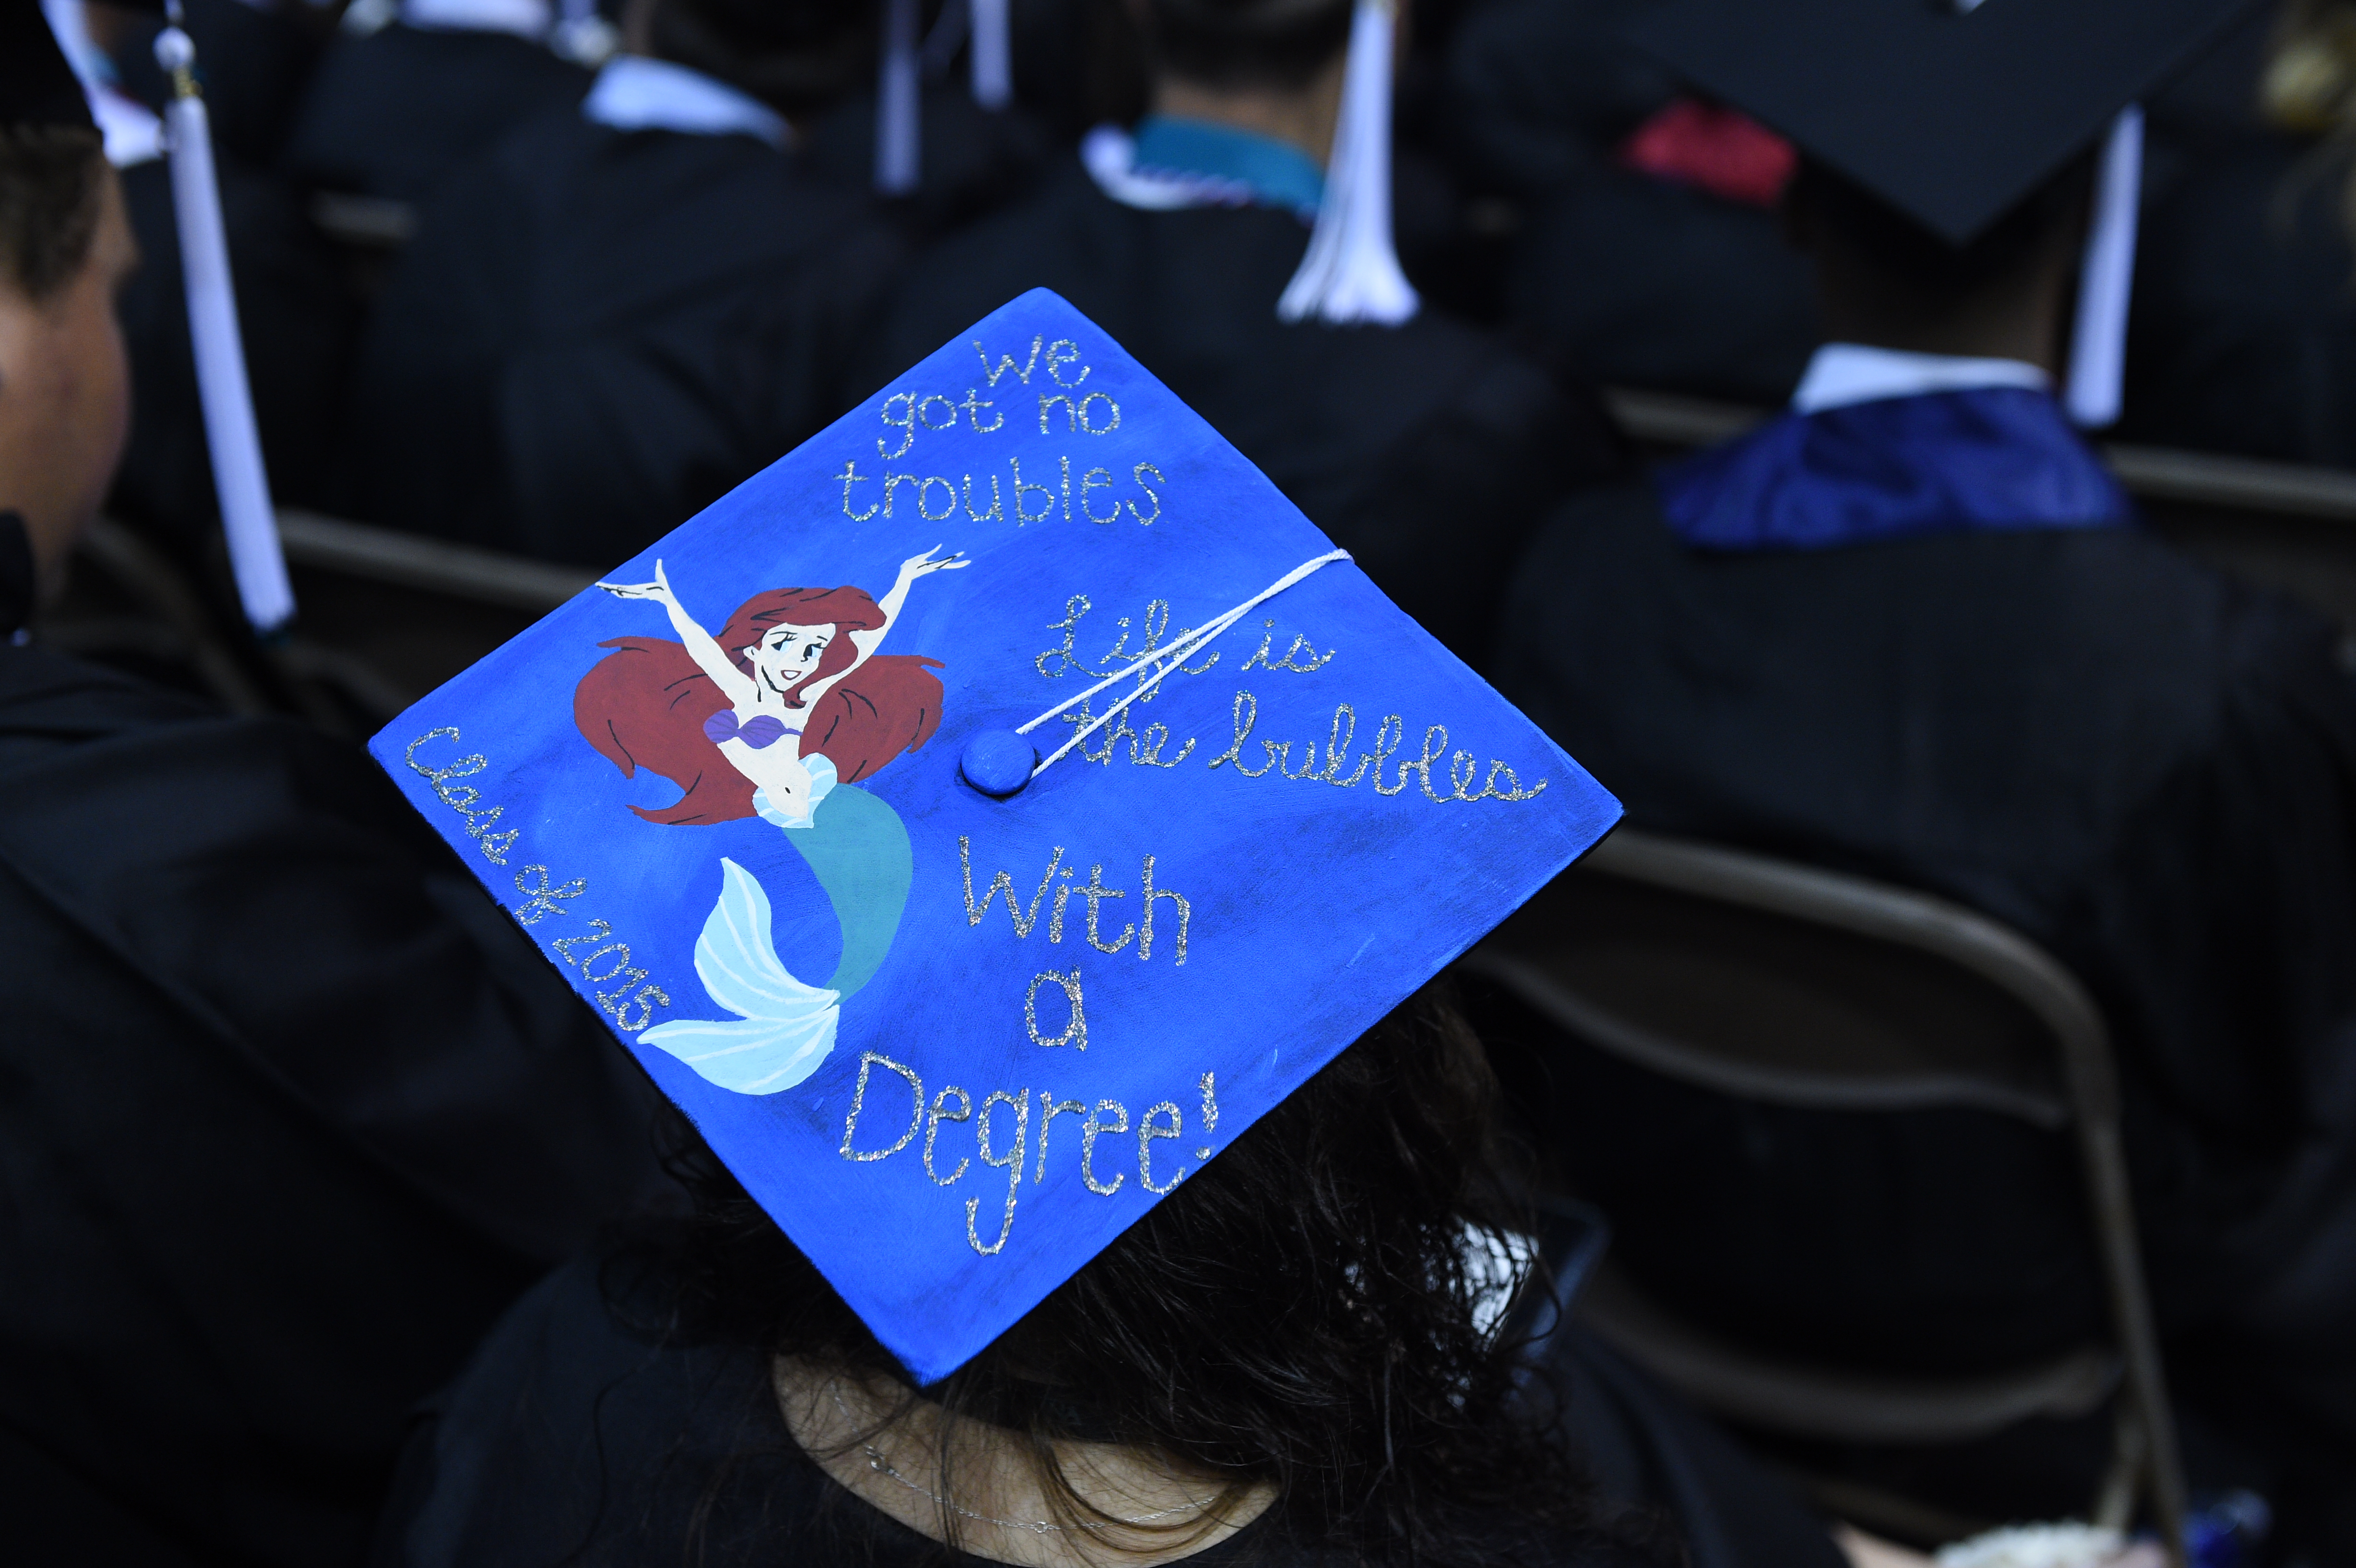 Although it didn't come close to winning, I thought the "Little Mermaid" cap was cool.